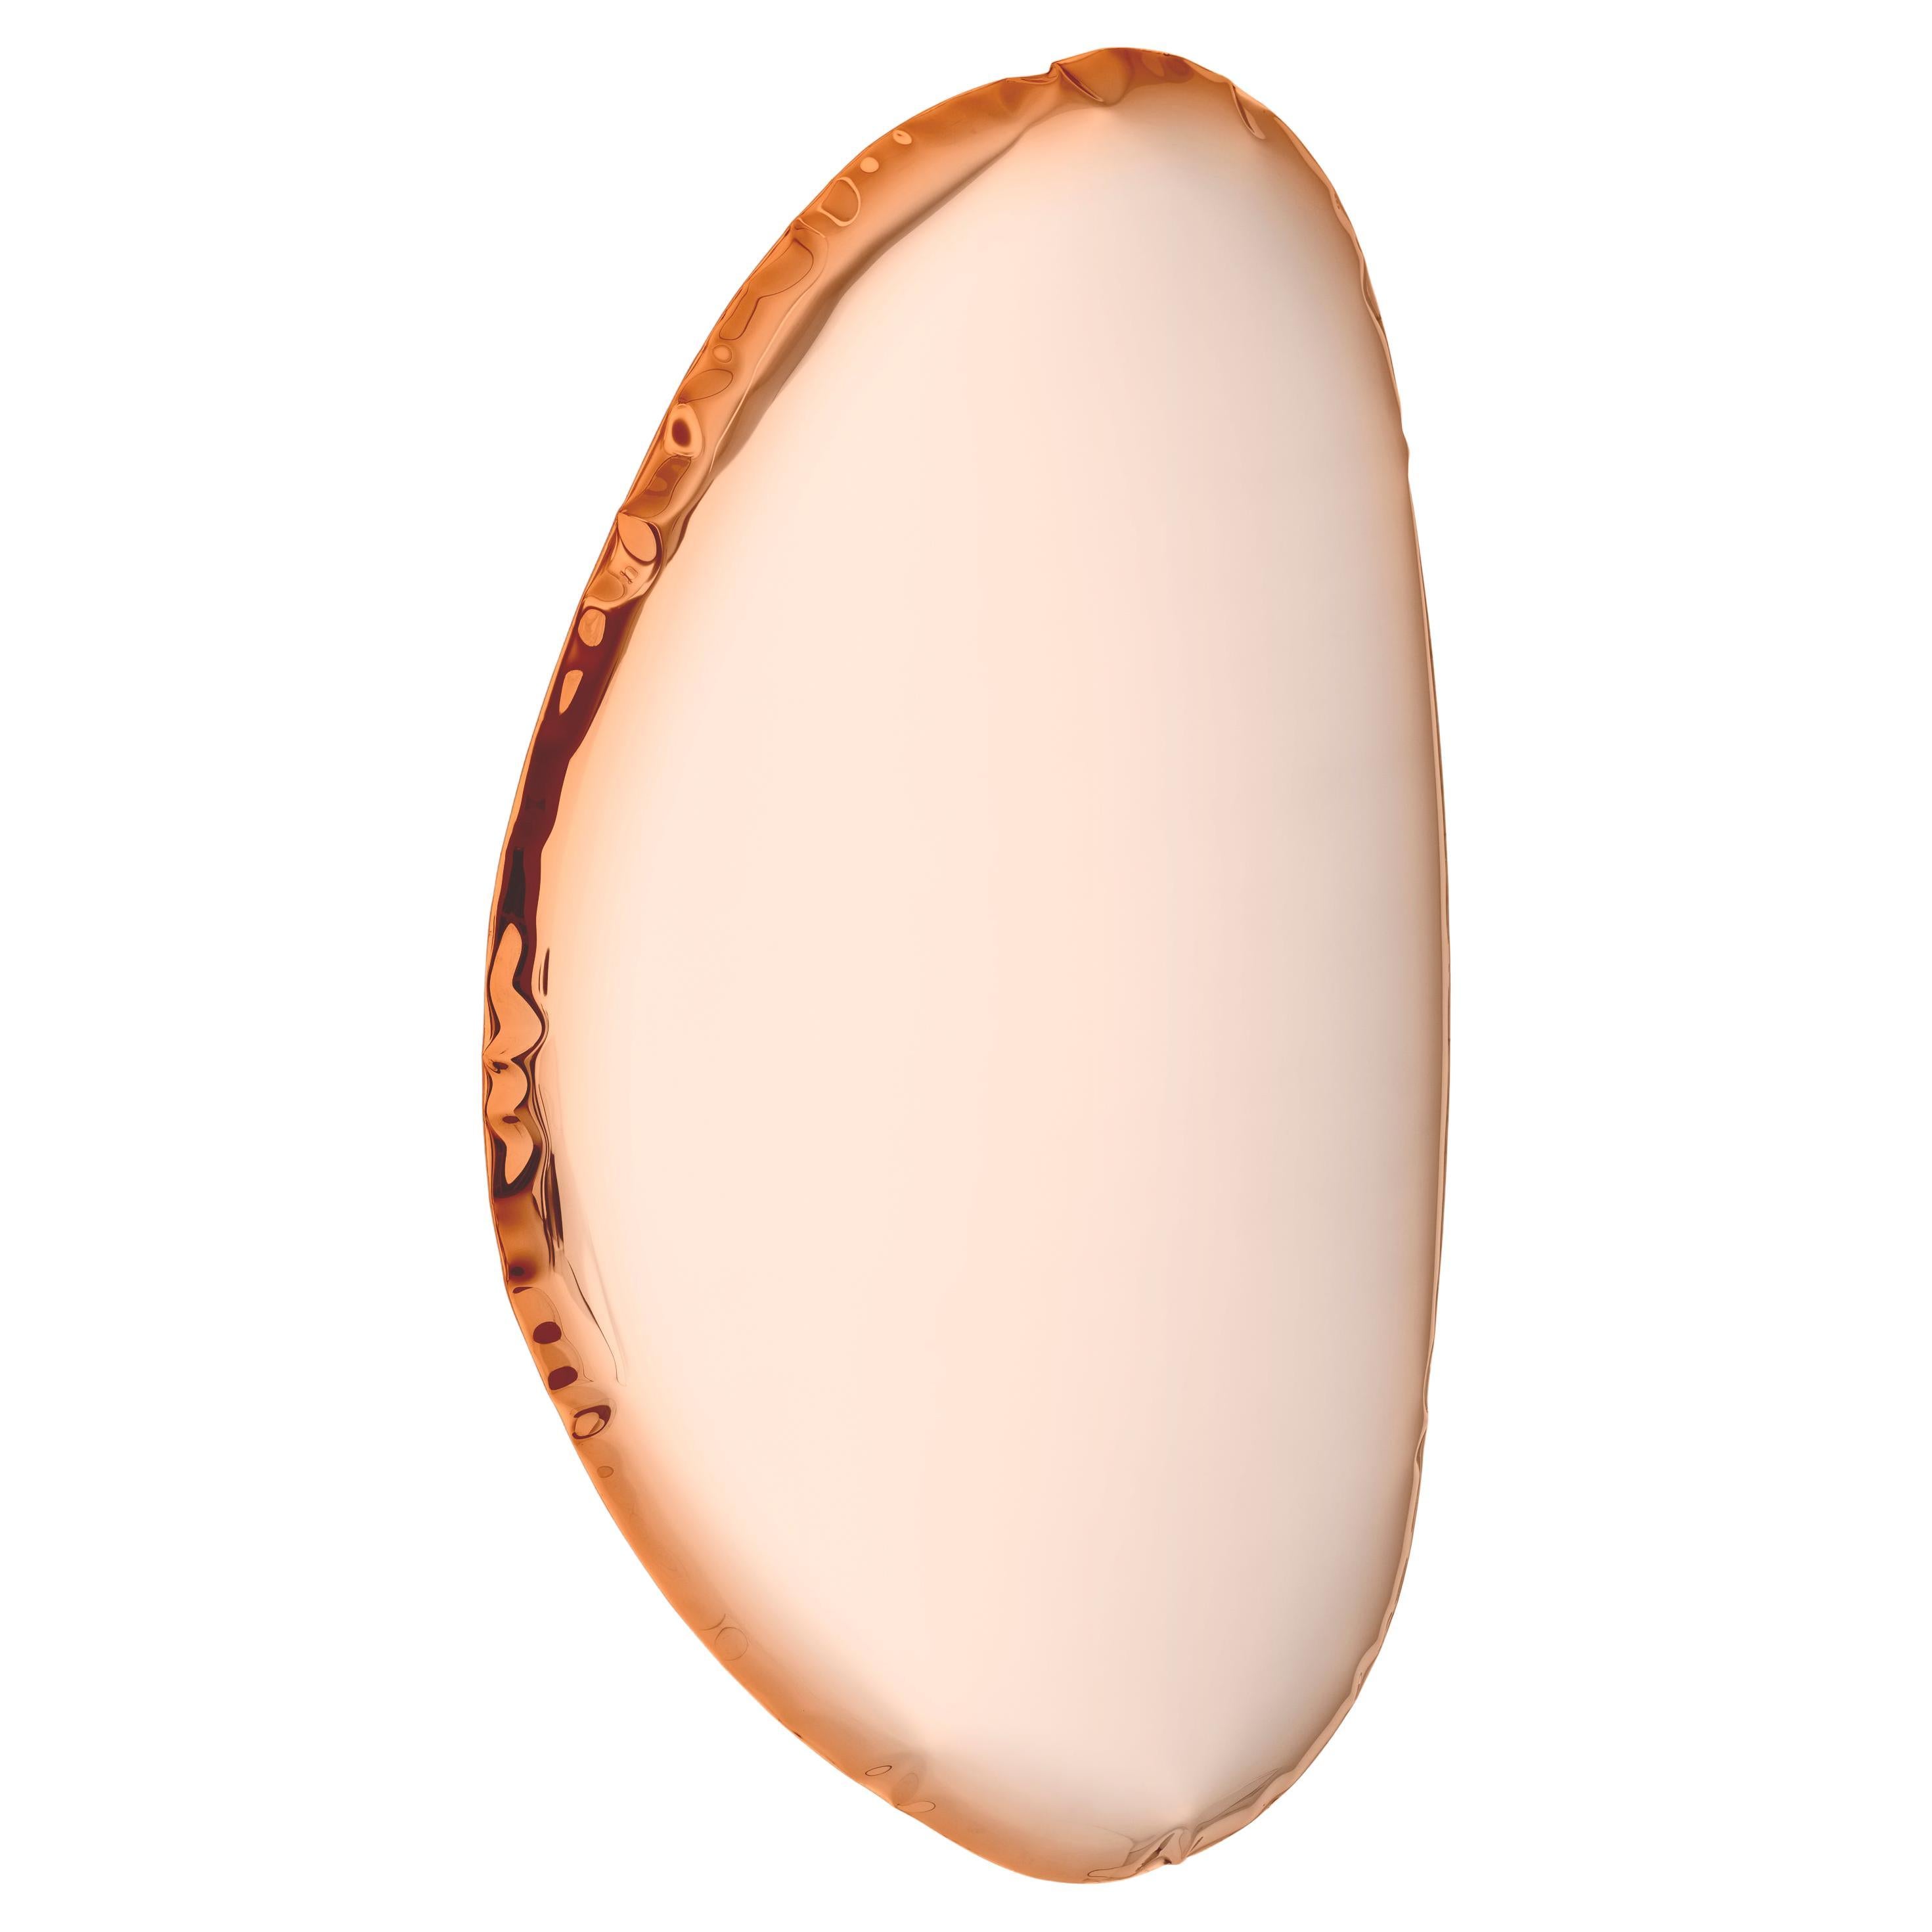 Tafla O3 Polished Stainless Steel Rose Gold Color Wall Mirror by Zieta For Sale